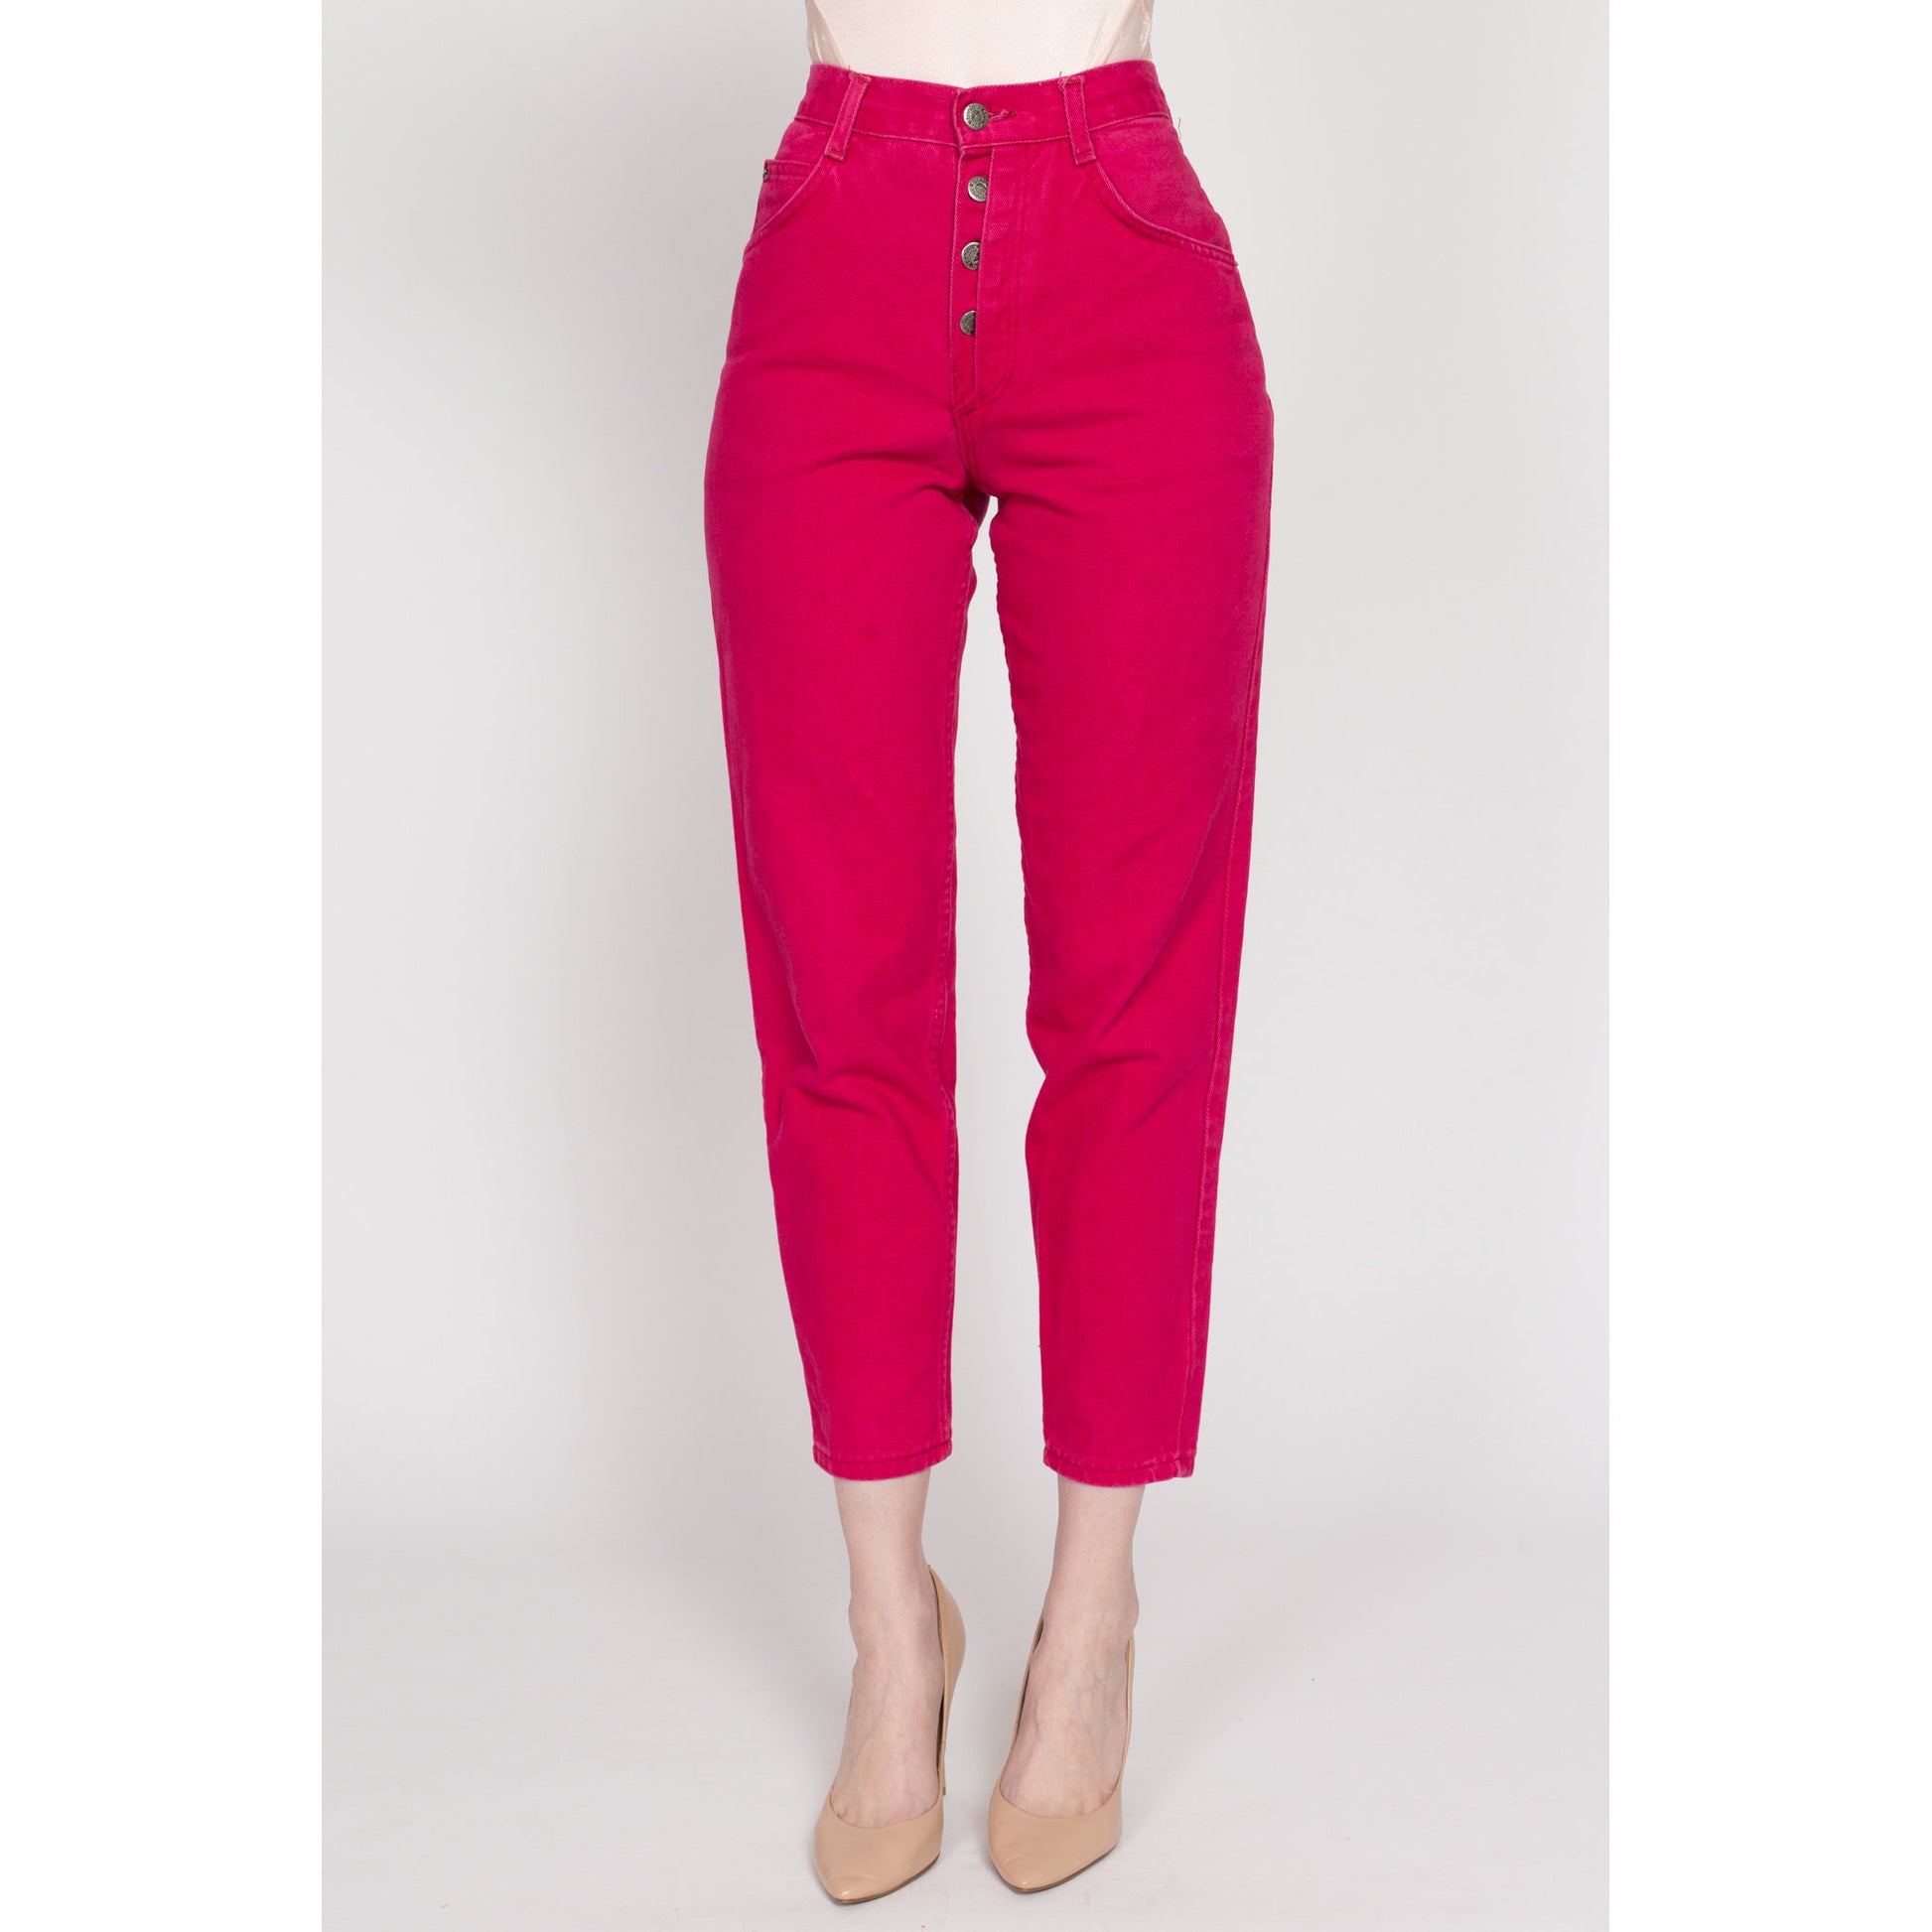 High-waisted pink jeans with visible buttons